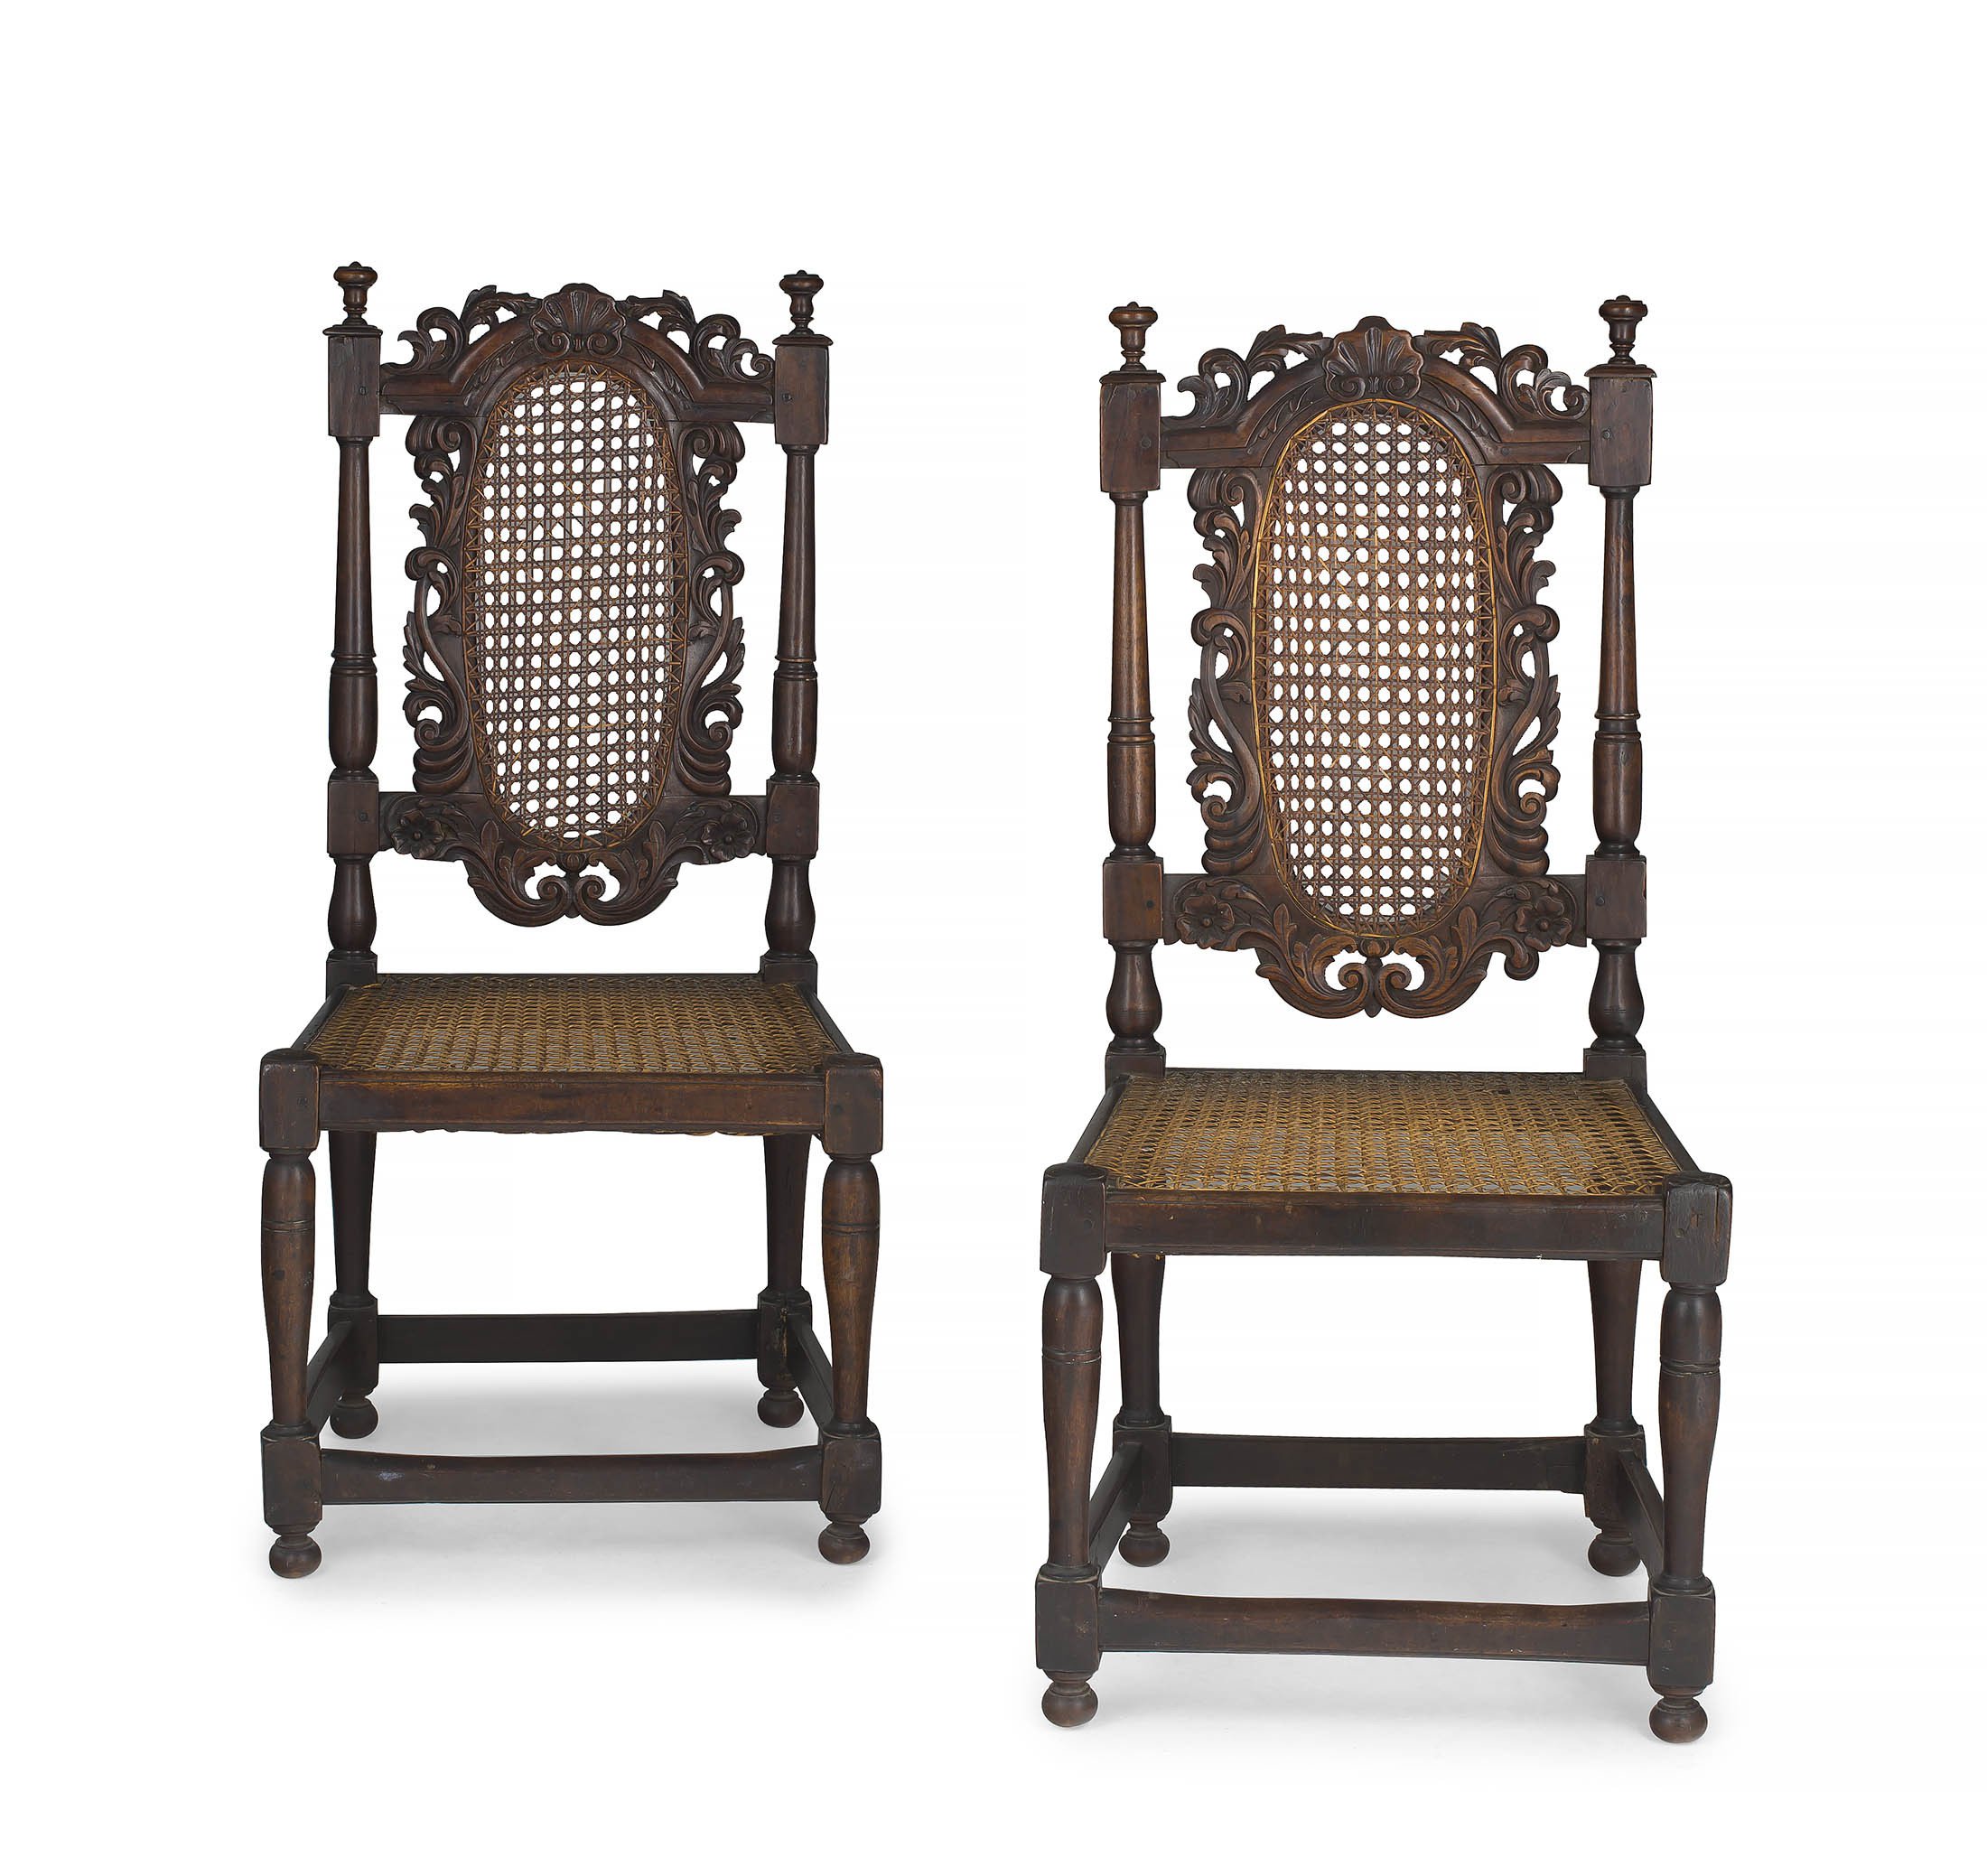 A pair of Cape Van der Stel stinkwood side chairs, 19th century